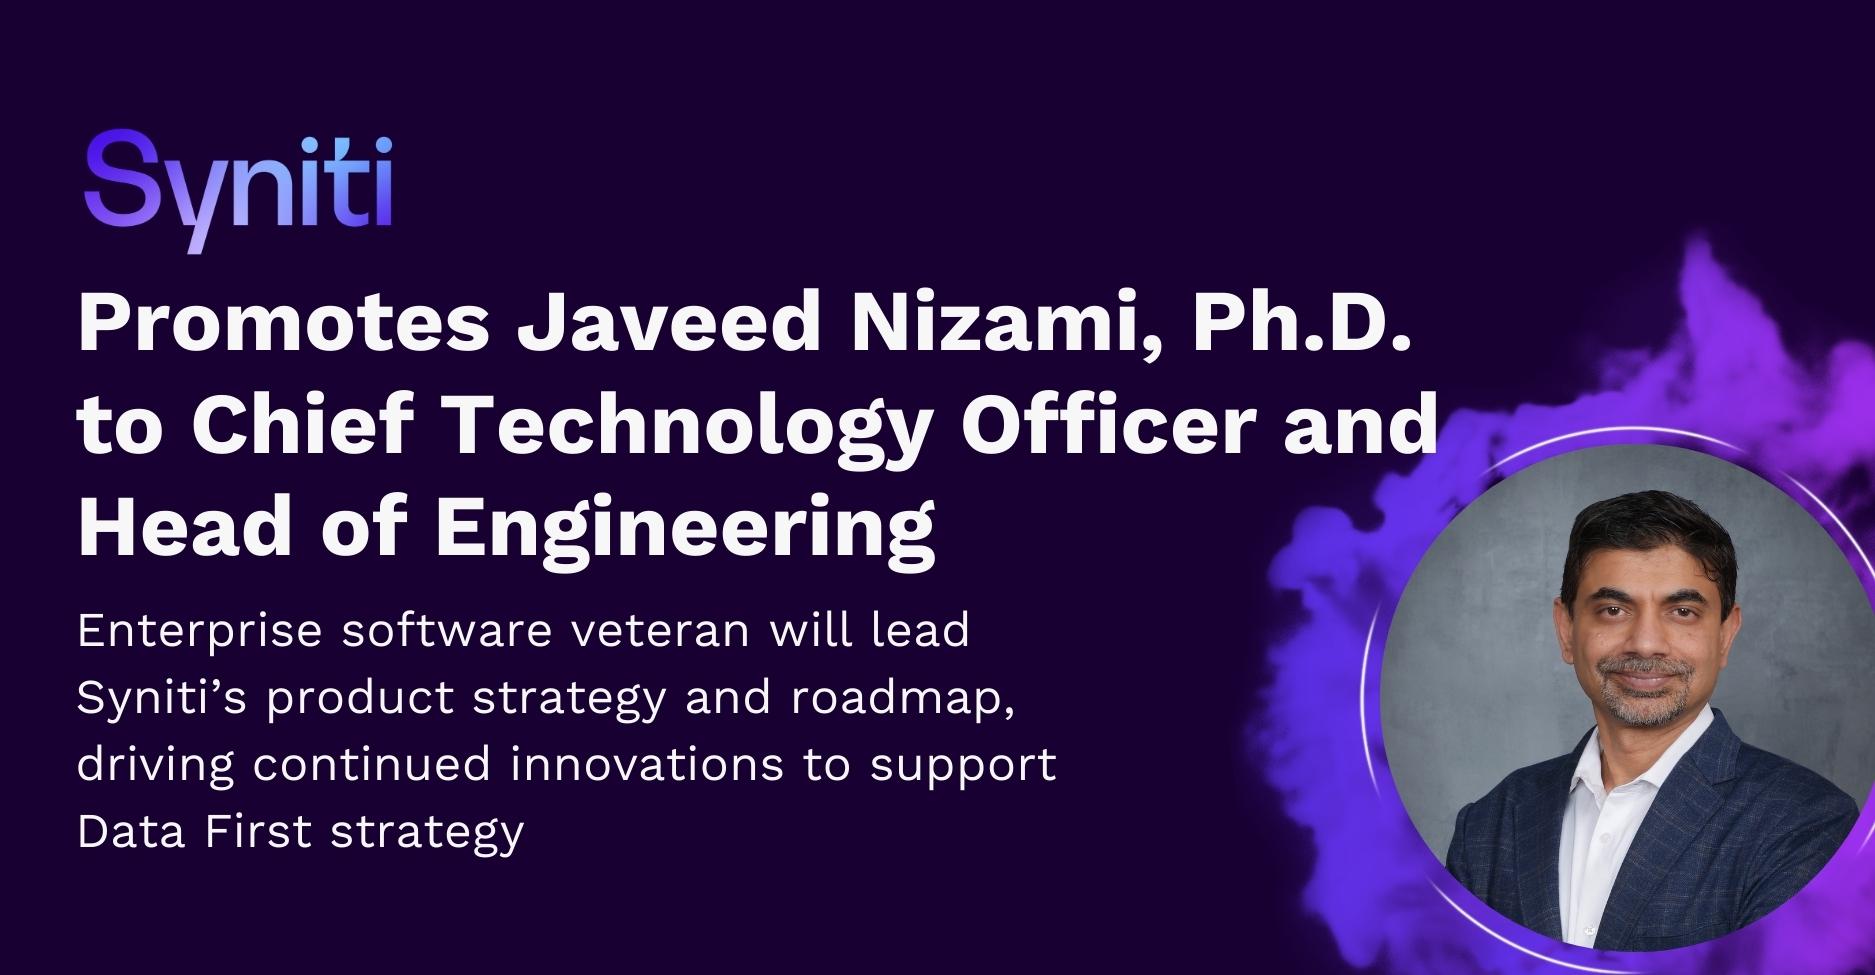 Syniti Promotes Javeed Nizami, Ph.D. to Chief Technology Officer and Head of Engineering